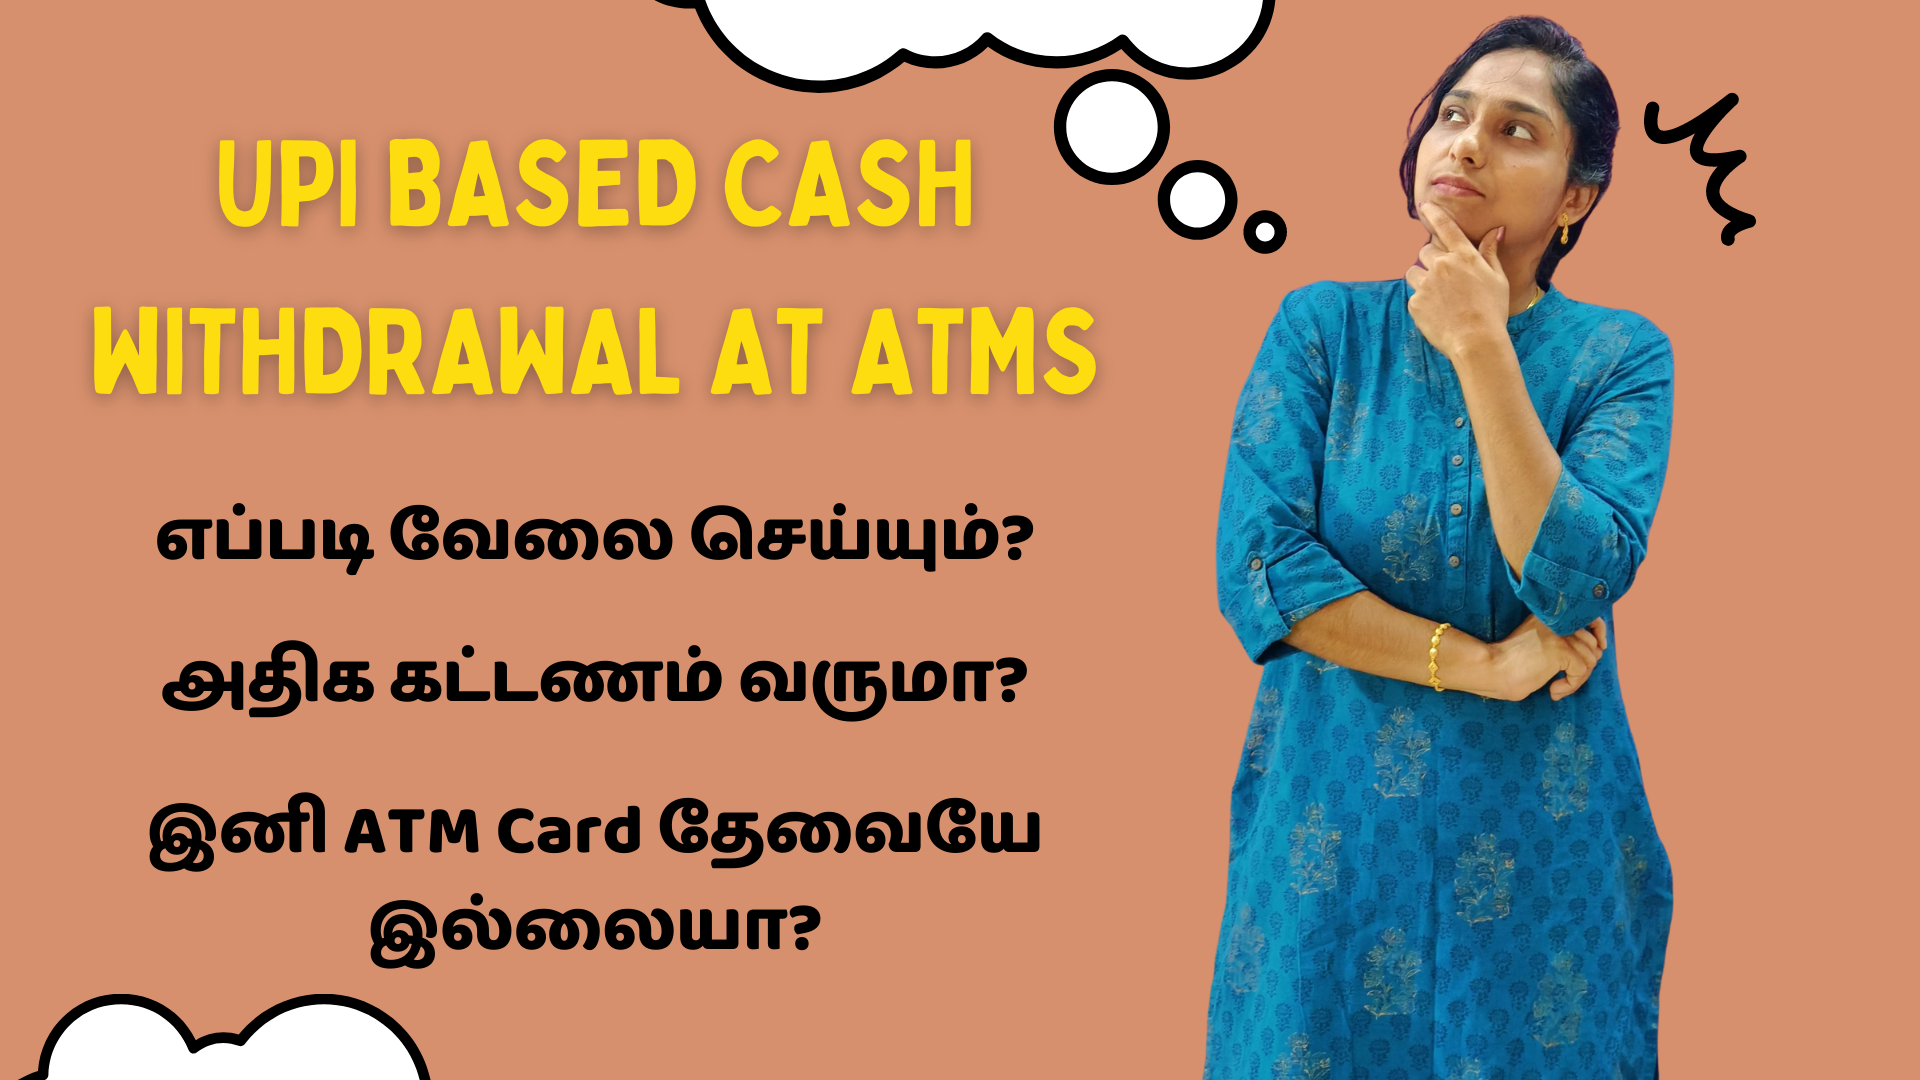 How Would UPI Based Cash Withdrawal At ATMs Work? Will You Be Charged More? No More Debit Cards?